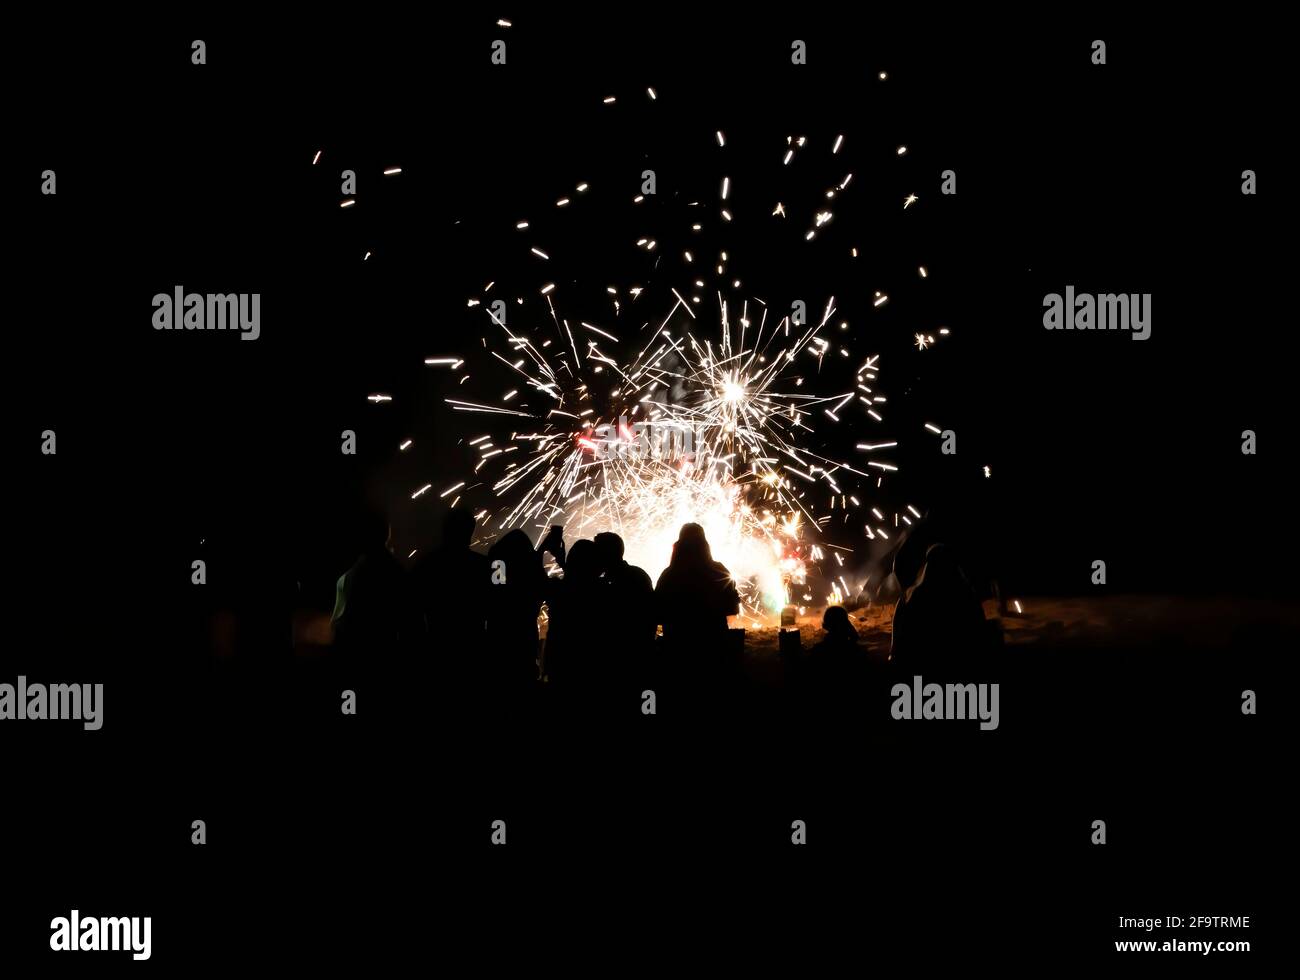 People take selfies and watch fireworks on beach with explosions of color against solid black night. Stock Photo